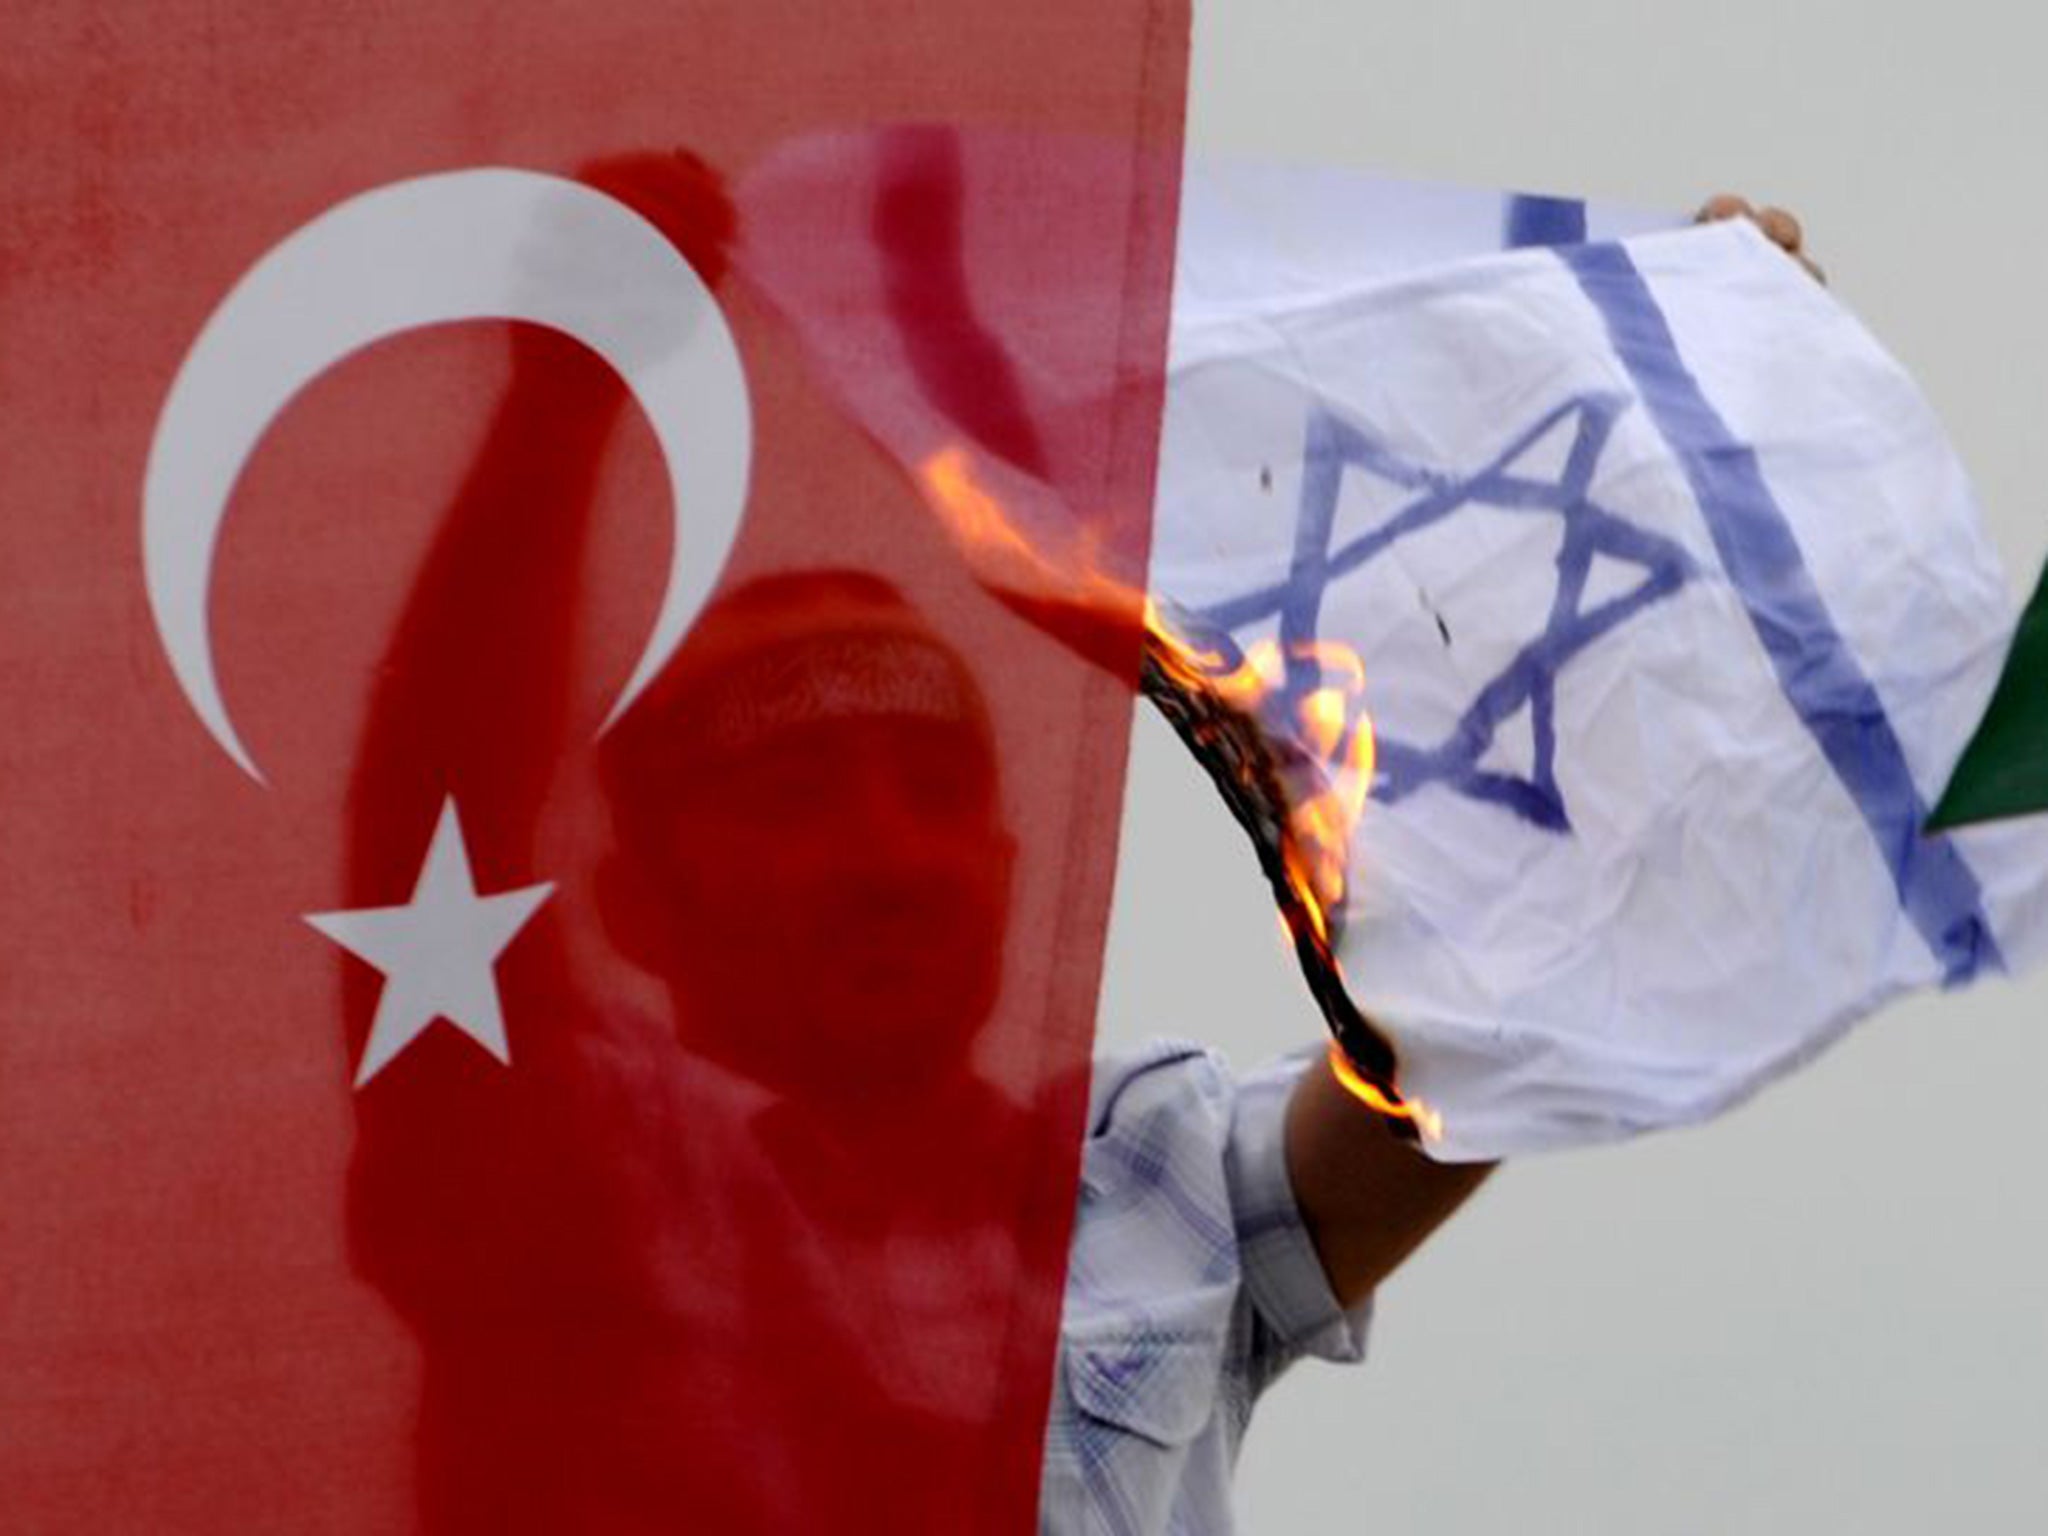 A demonstrator burns an Israeli flag a during a protest against Israel in Istanbul in 2010